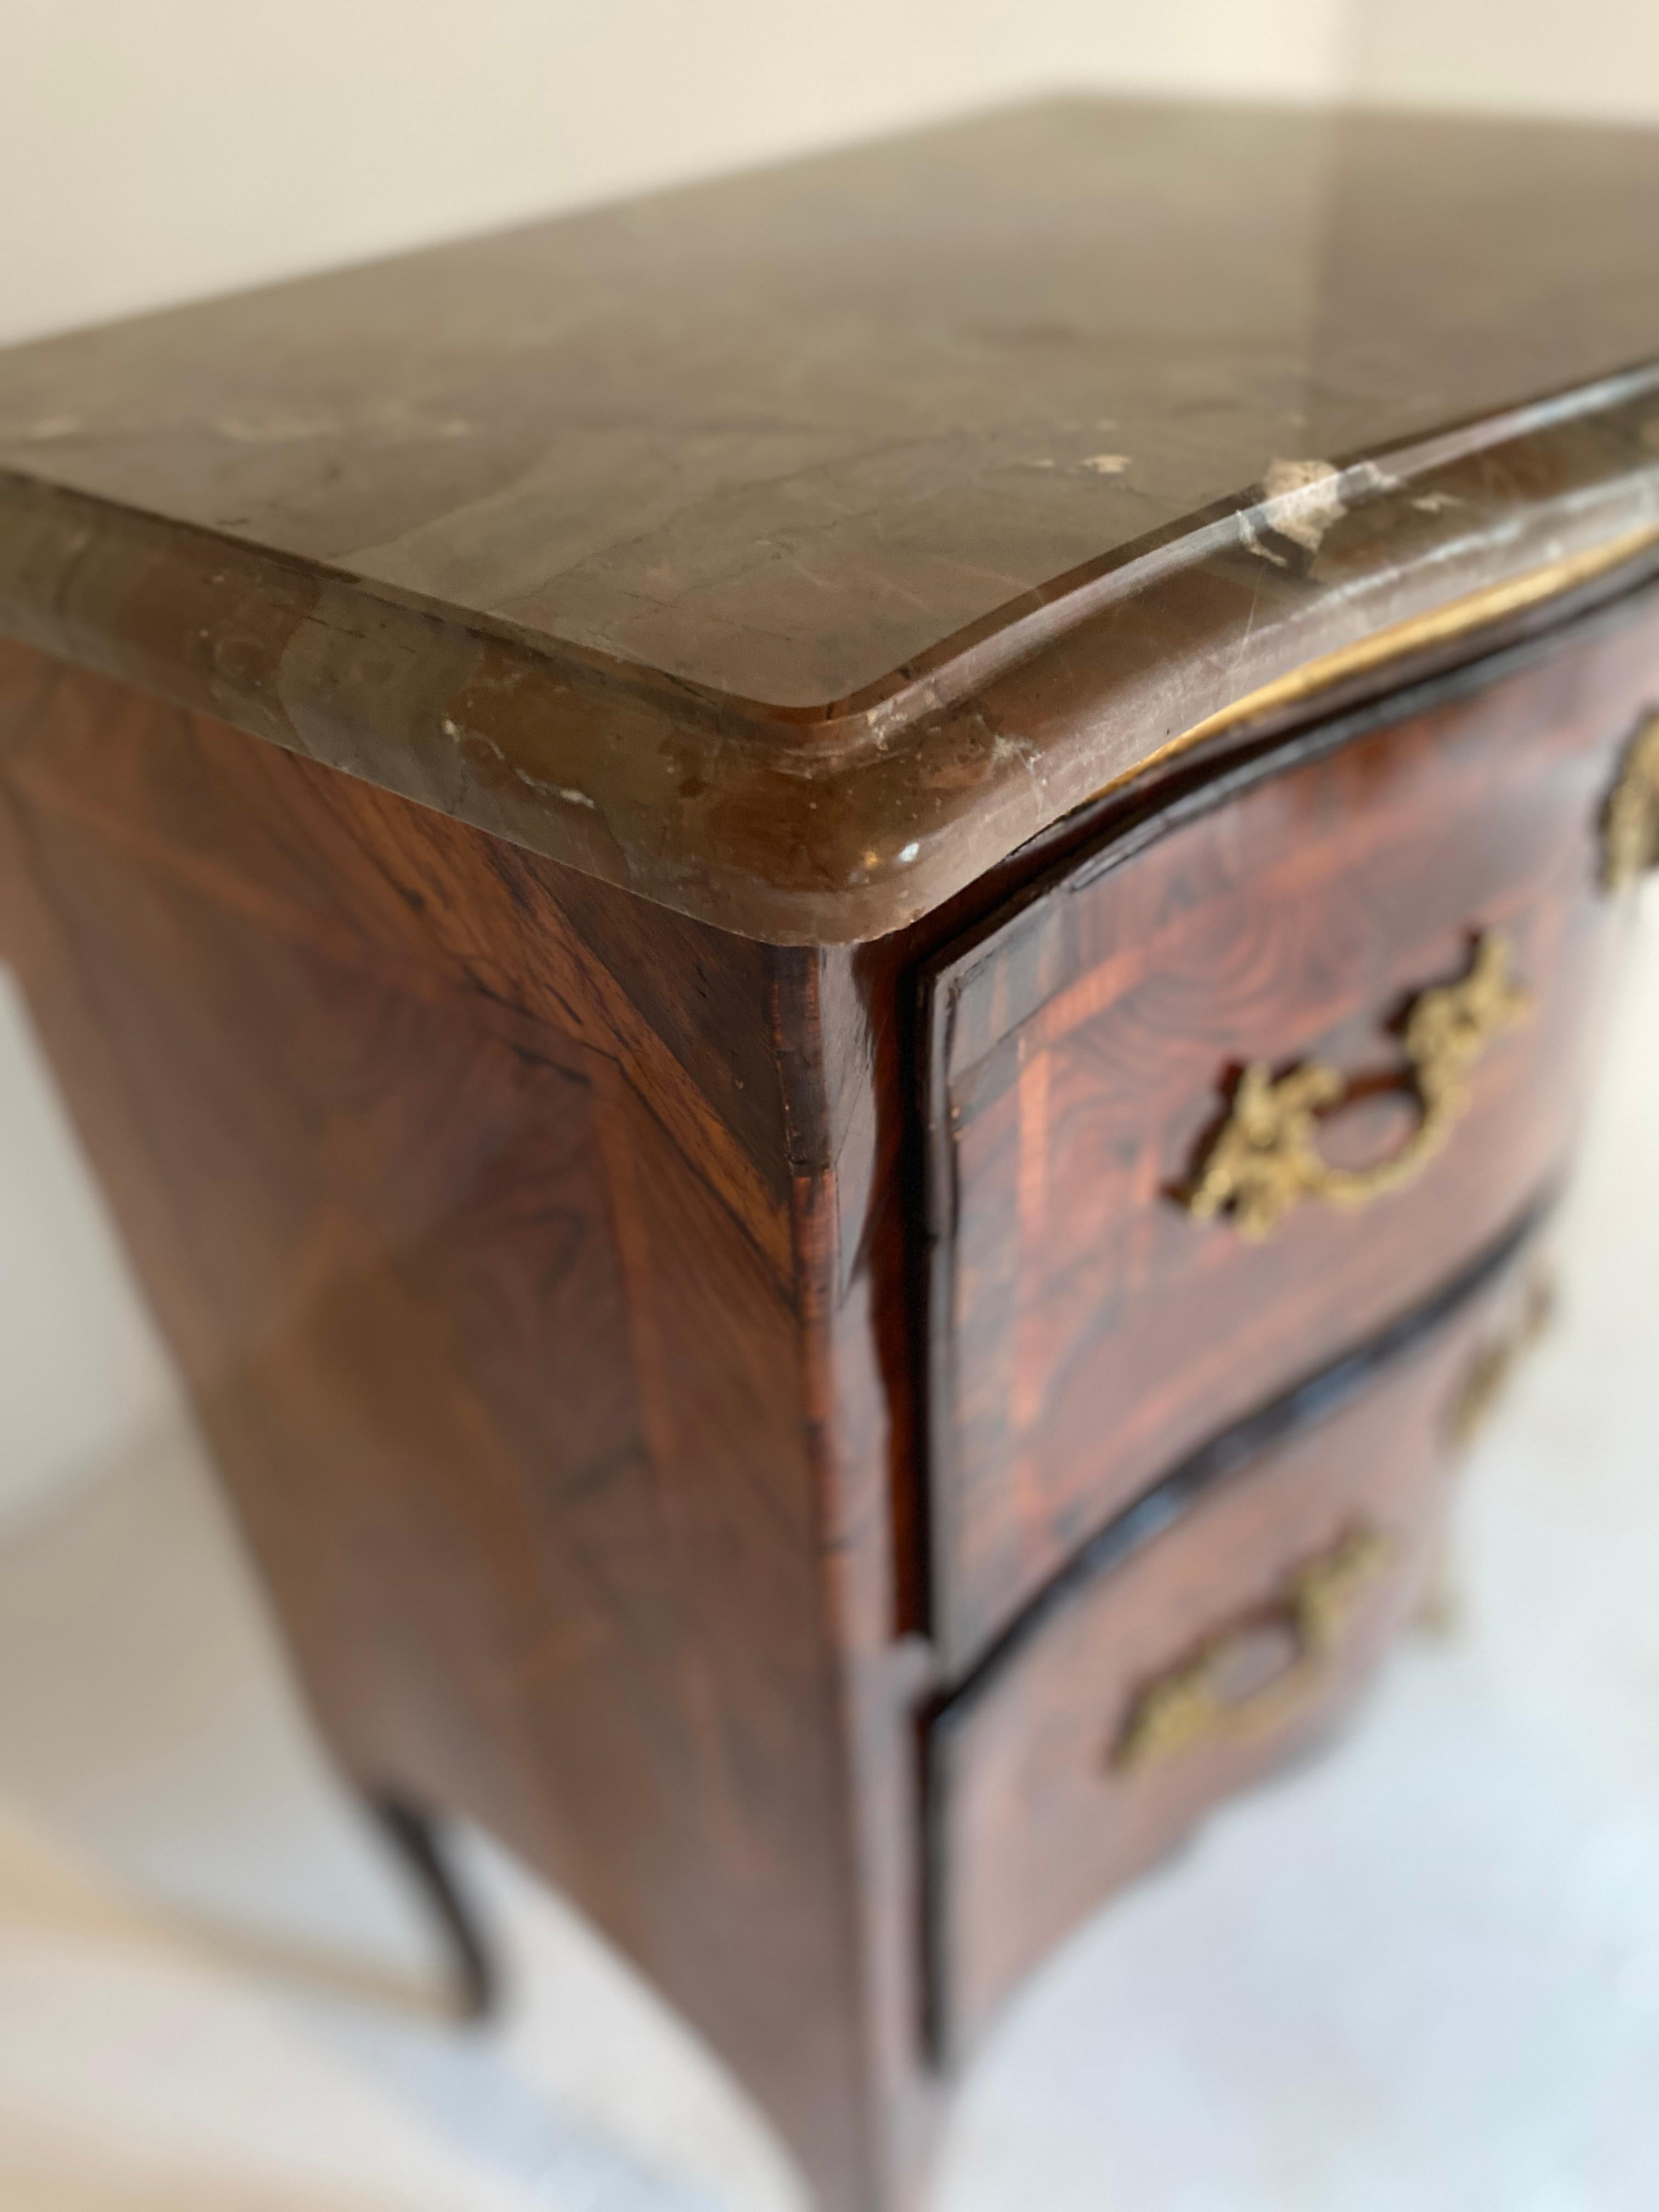 very pretty little chest of drawers sauteuse d'entre deux louis xv 18th century
 a marquetry of bramble and walnut original marble the bronzes are in perfect condition nice work of cabinetmaker
South France 